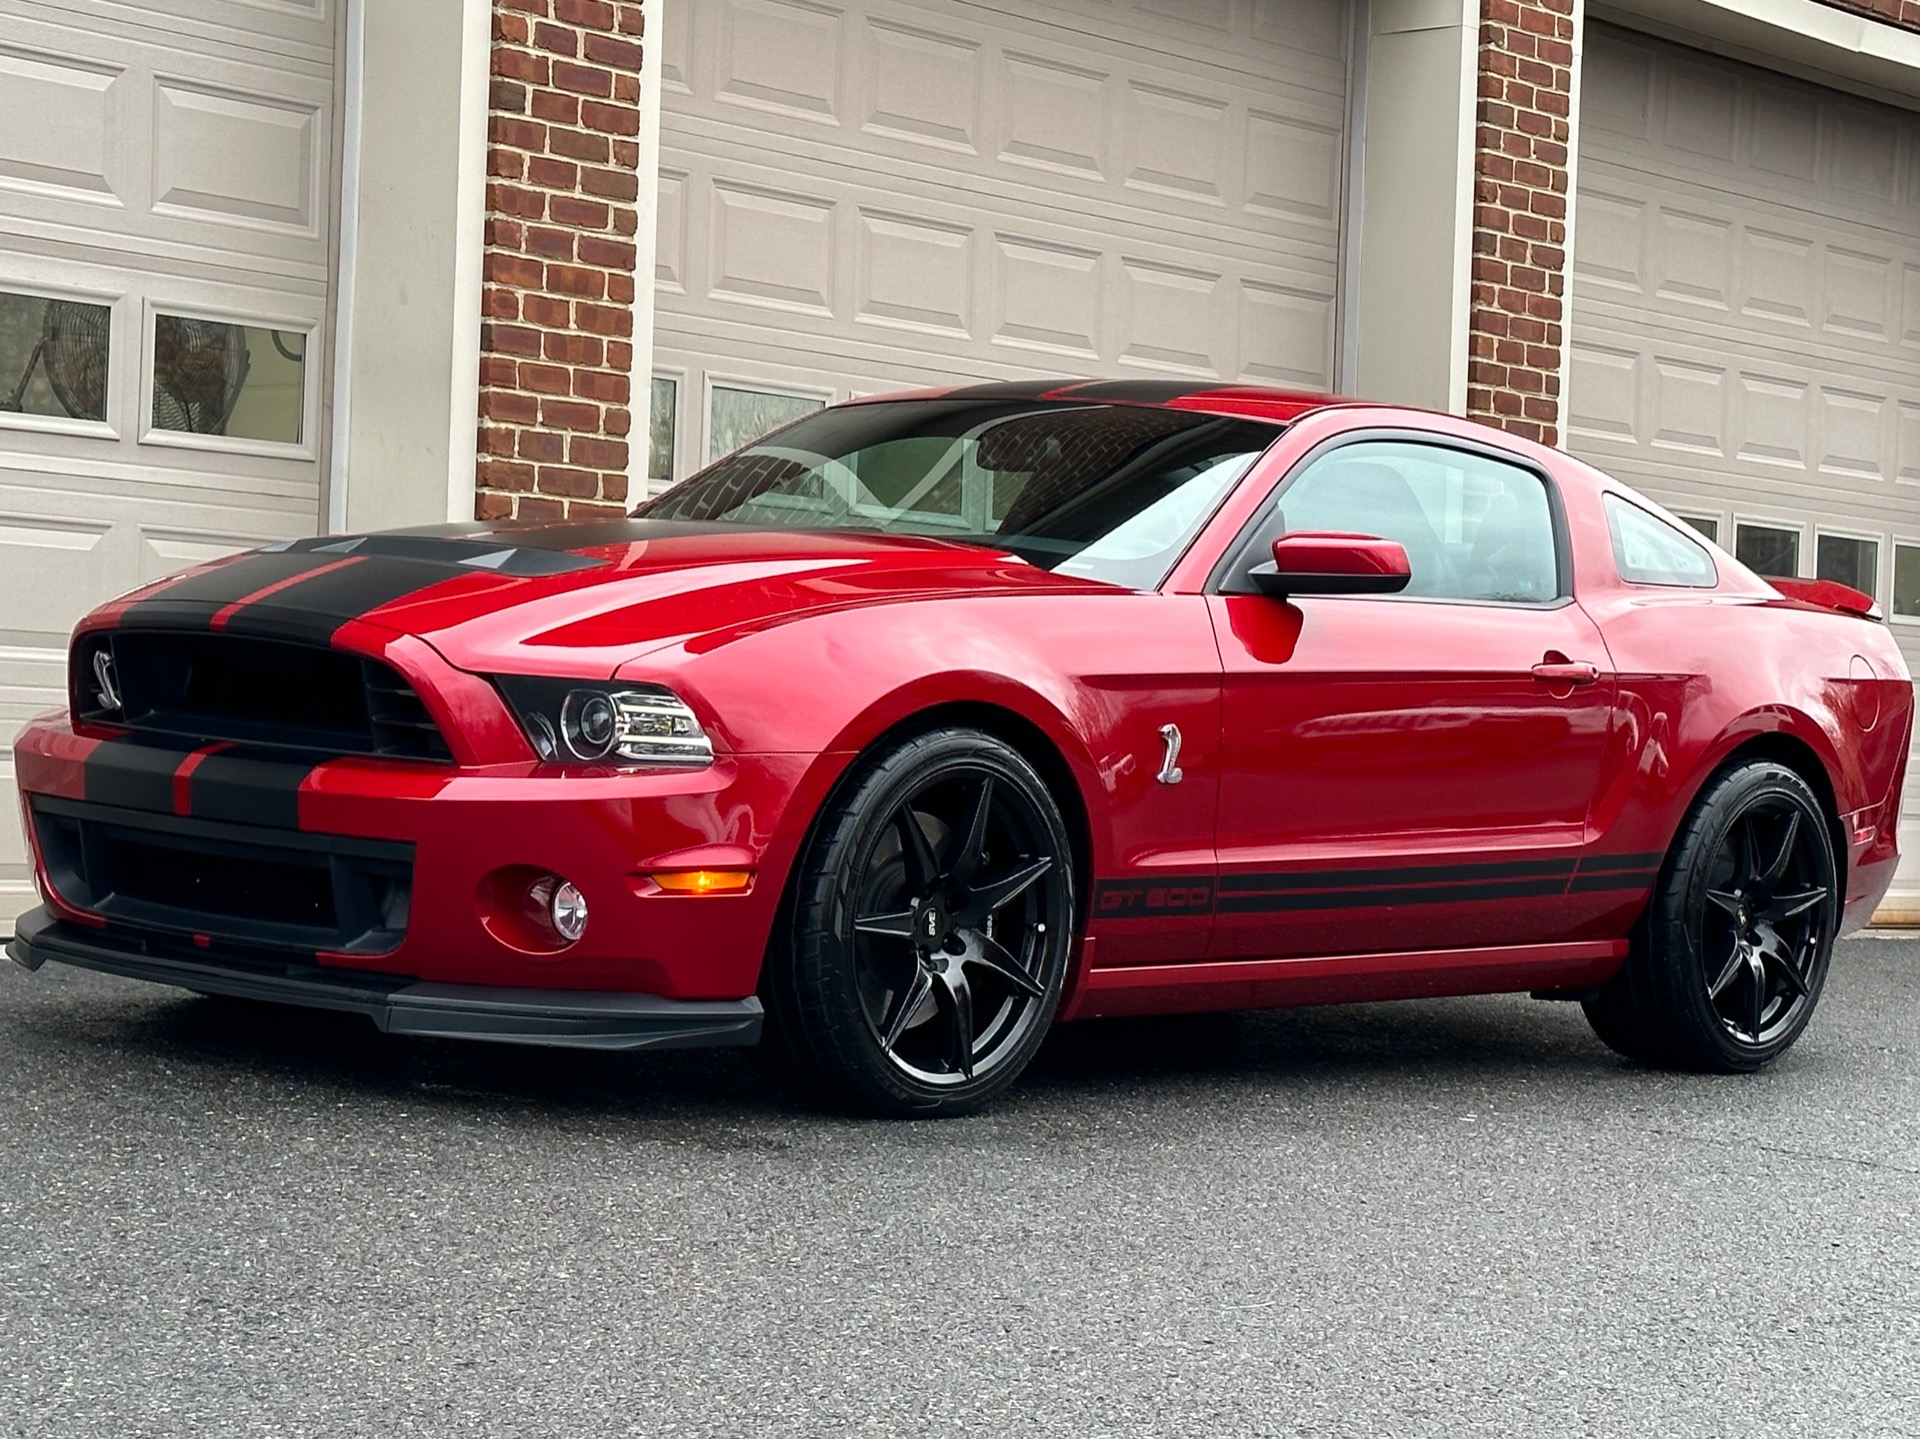 Used 2013 Ford Shelby GT500 SVT Performance | Edgewater Park, NJ